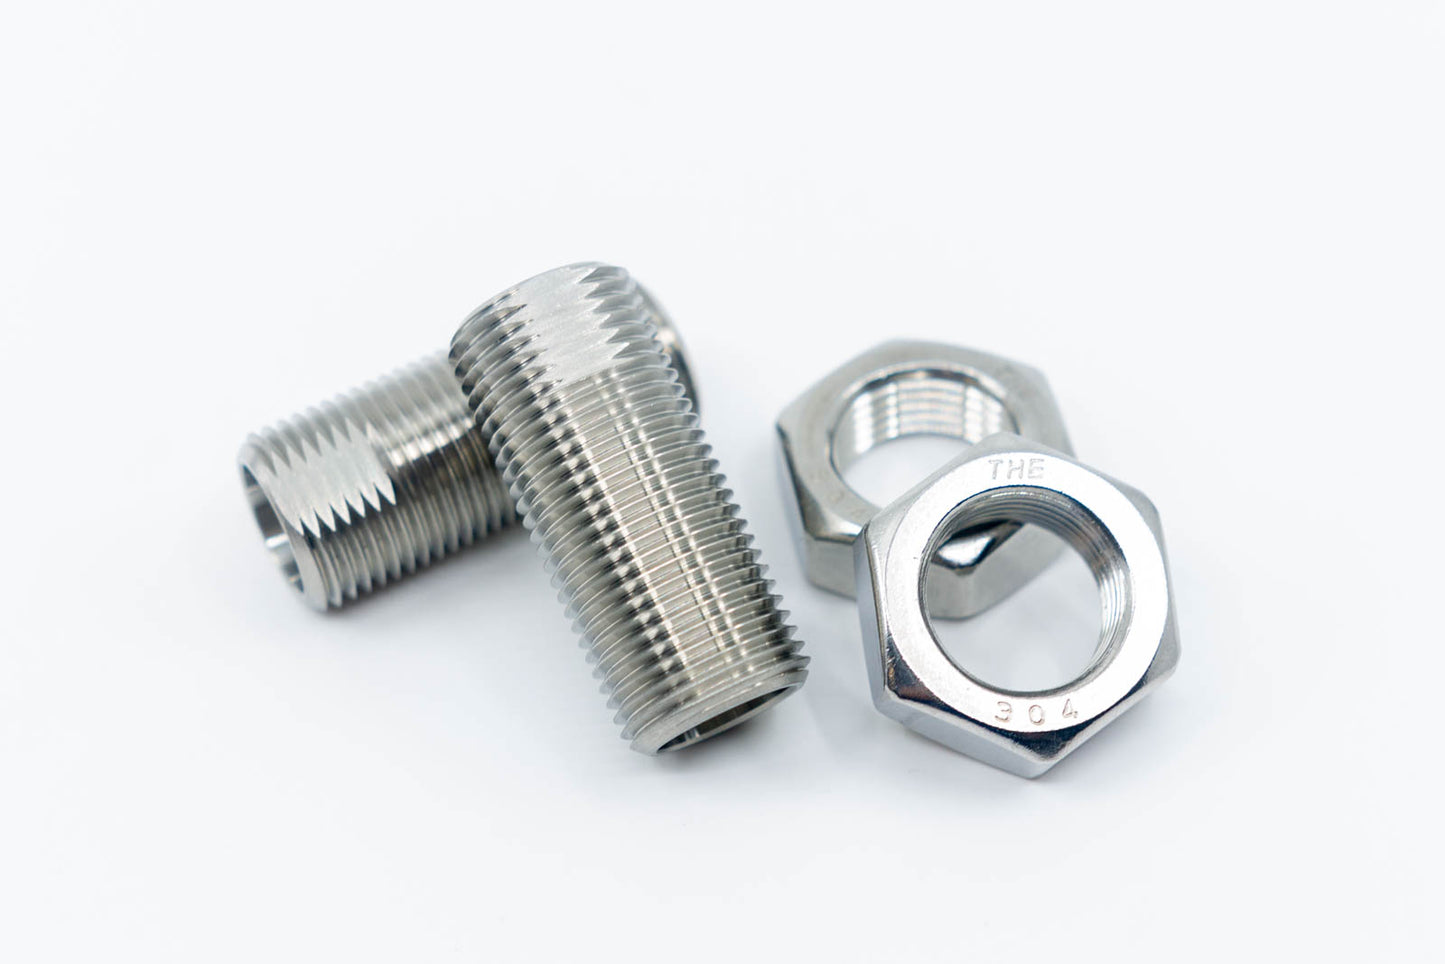 5/8" x 2" Stainless Steel Axle Sleeves with Nuts (Pair)